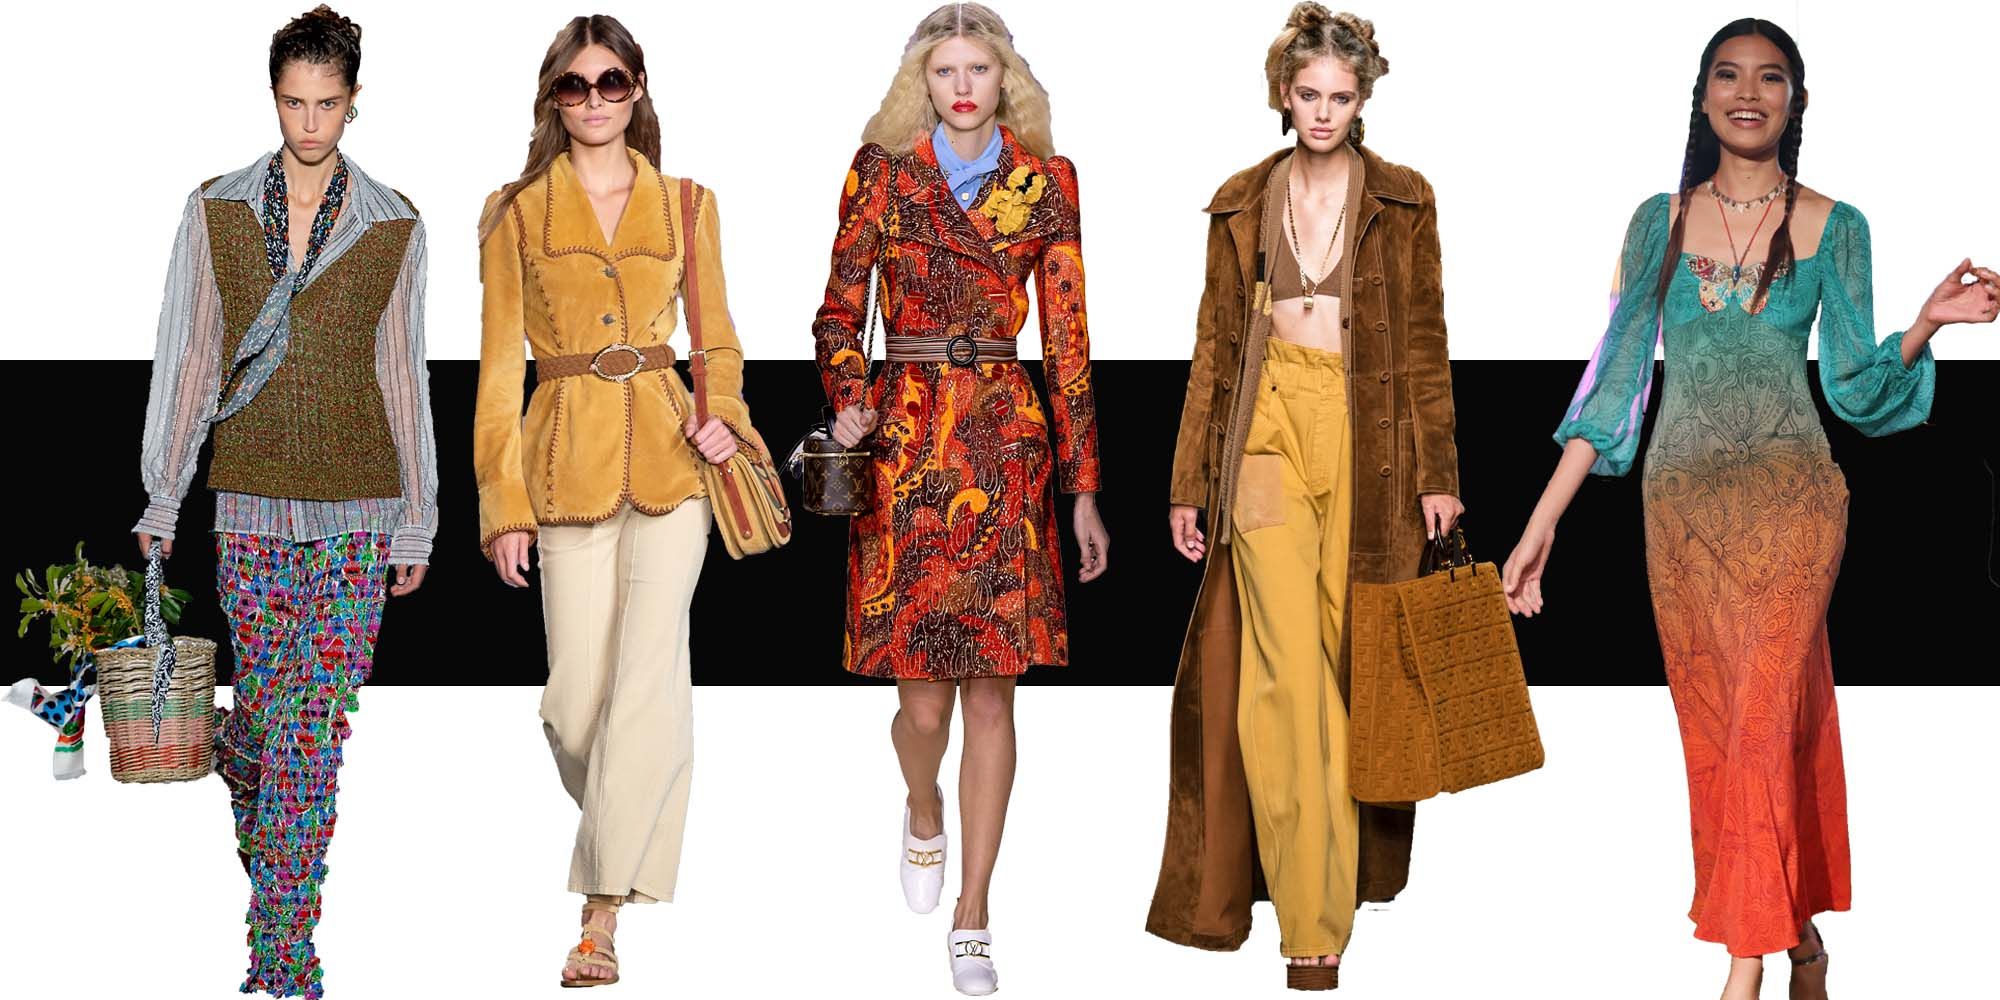 SS20 Fashion Trend Report: Women's Fashion Trends For Spring Summer 2020